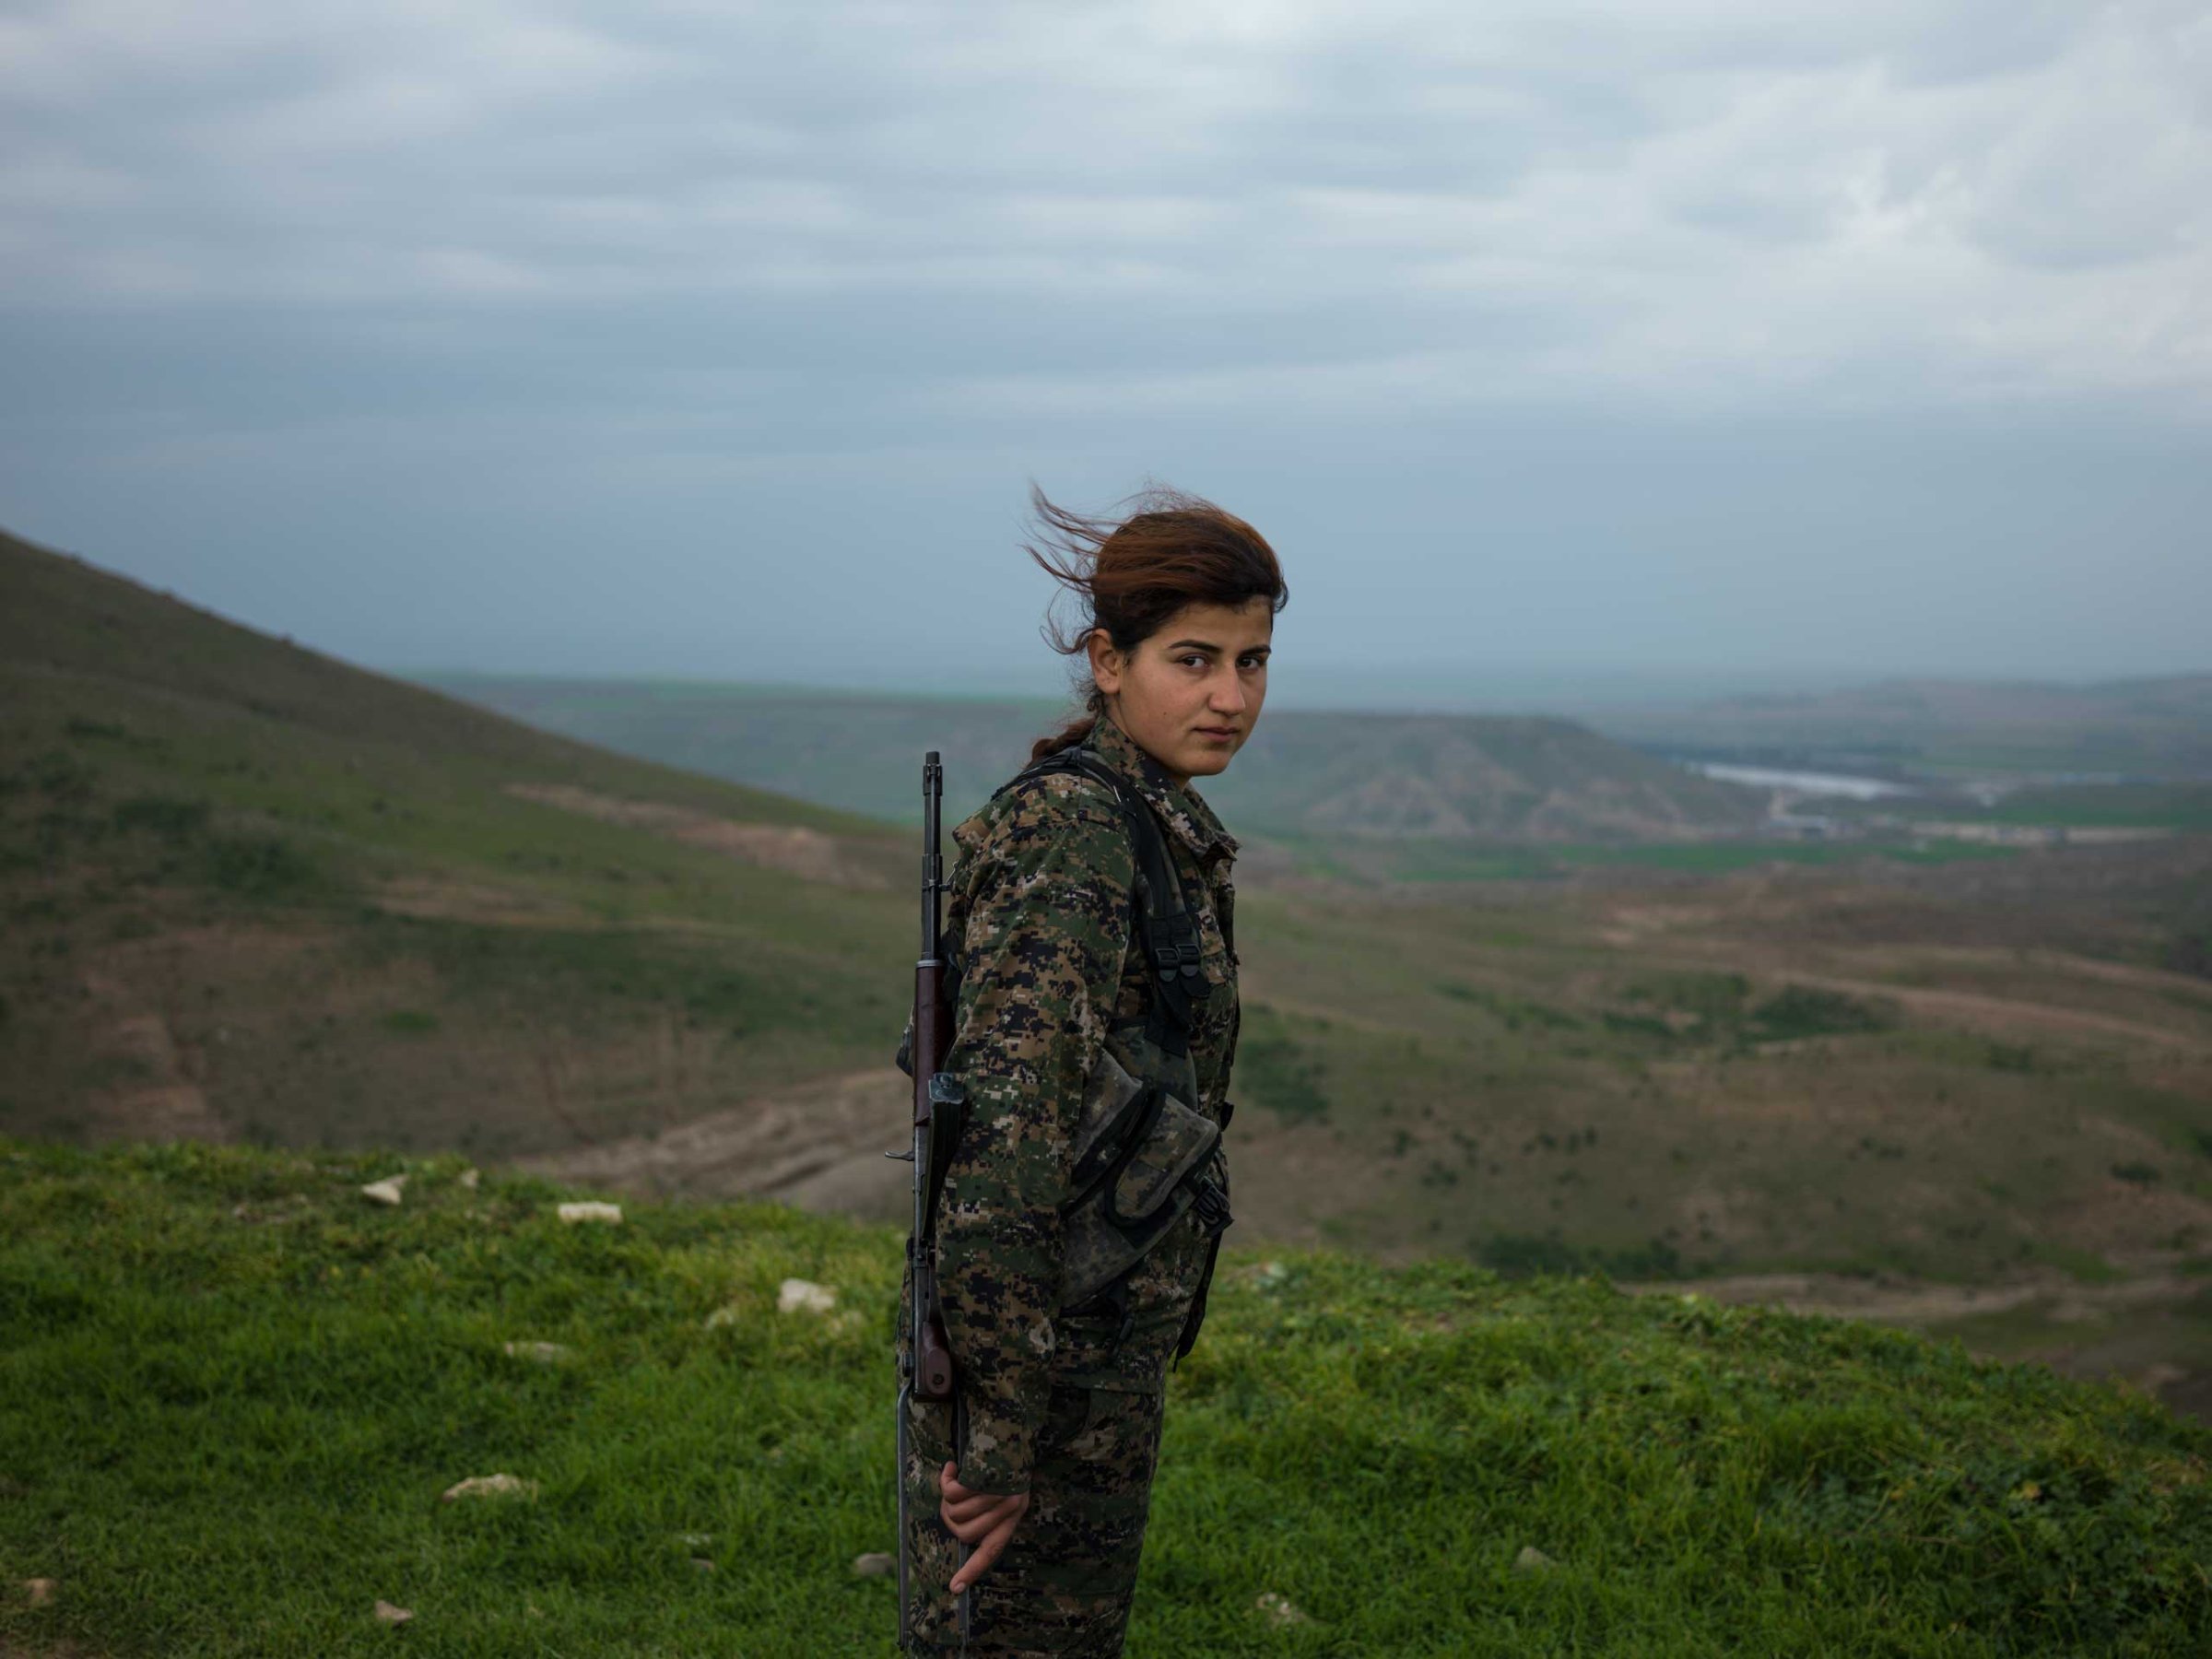 18-year-old YPJ fighter Torin Khairegi: “We live ina world where women are dominated by men.We are here to take control of our future..I injured an ISIS jihadi in Kobane. When he was wounded, all his friends left him behind and ran away. Later I went there and buried his body. I now feel that I am very powerful and can defend my home, my friends, my country, and myself. Many of us have been matryred and I see no path other than the continuation of their path." Newsha Tavakolian for TIME Zinar base, Syria "I joined YPJ about seven months ago, because I was looking for something meaningful in my life and my leader [ Abdullah Ocalan] showed me the way and my role in the society. We live in a world where women are dominated by men. We are here to take control of our own future. We are not merely fighting with arms; we fight with our thoughts. Ocalan's ideology is always in our hearts and minds and it is with his thought that we become so empowered that we can even become better soldiers than men. When I am at the frontline, the thought of all the cruelty and injustice against women enrages me so much that I become extra-powerful in combat. I injured an ISIS jihadi in Kobane. When he was wounded, all his friends left him behind and ran away. Later I went there and buried his body. I now feel that I am very powerful and can defend my home, my friends, my country, and myself. Many of us have been matryred and I see no path other than the continuation of their path."